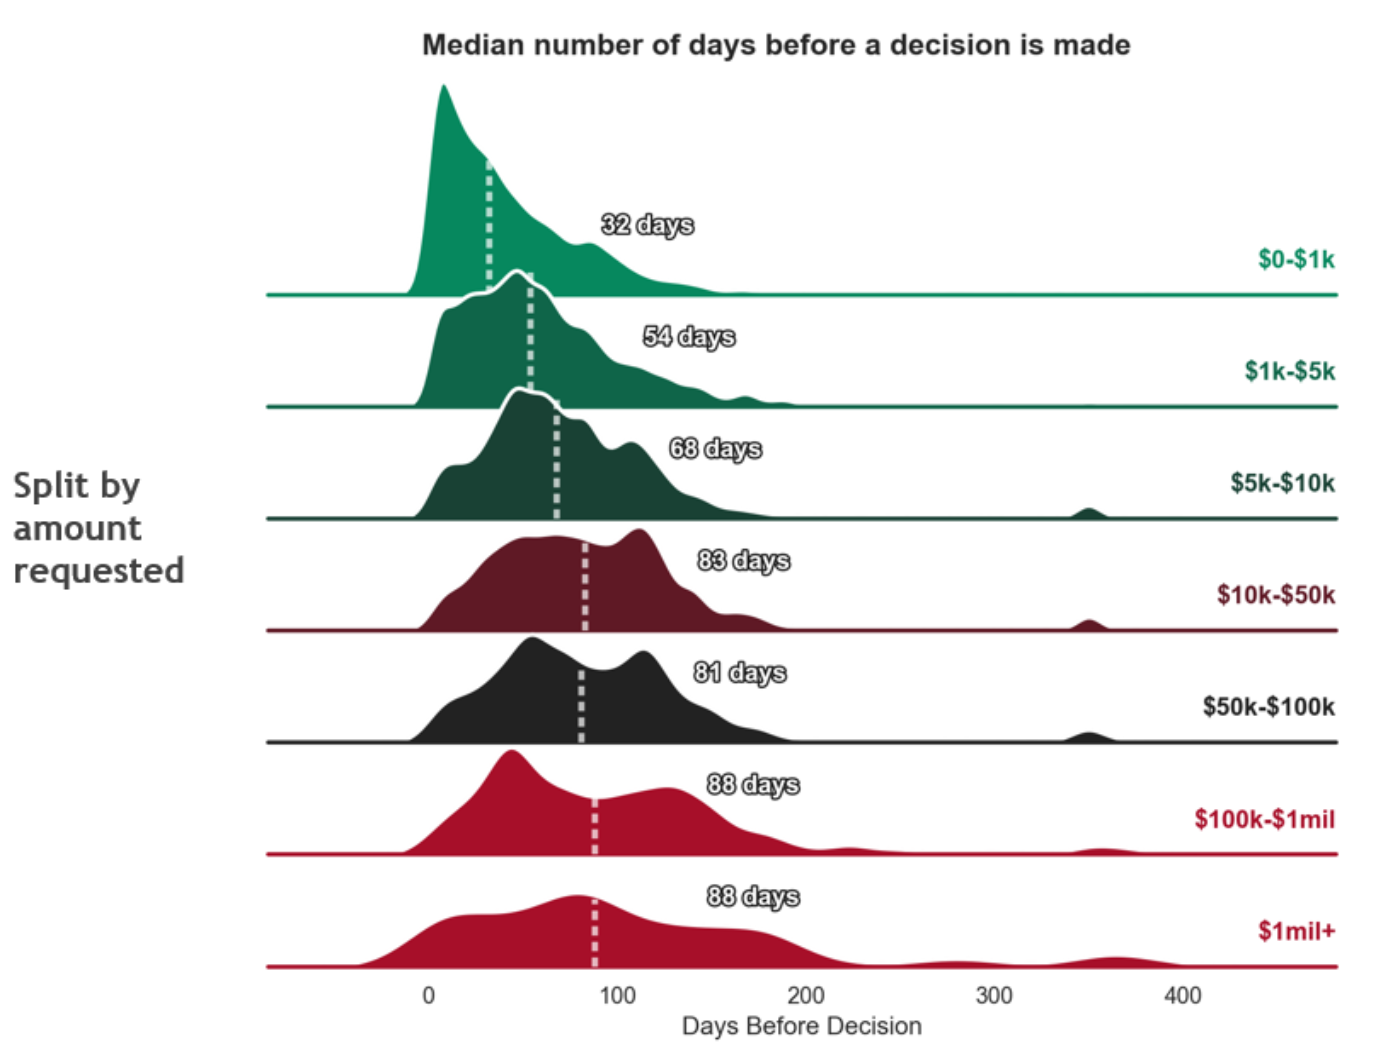 Median decision distribution by amt